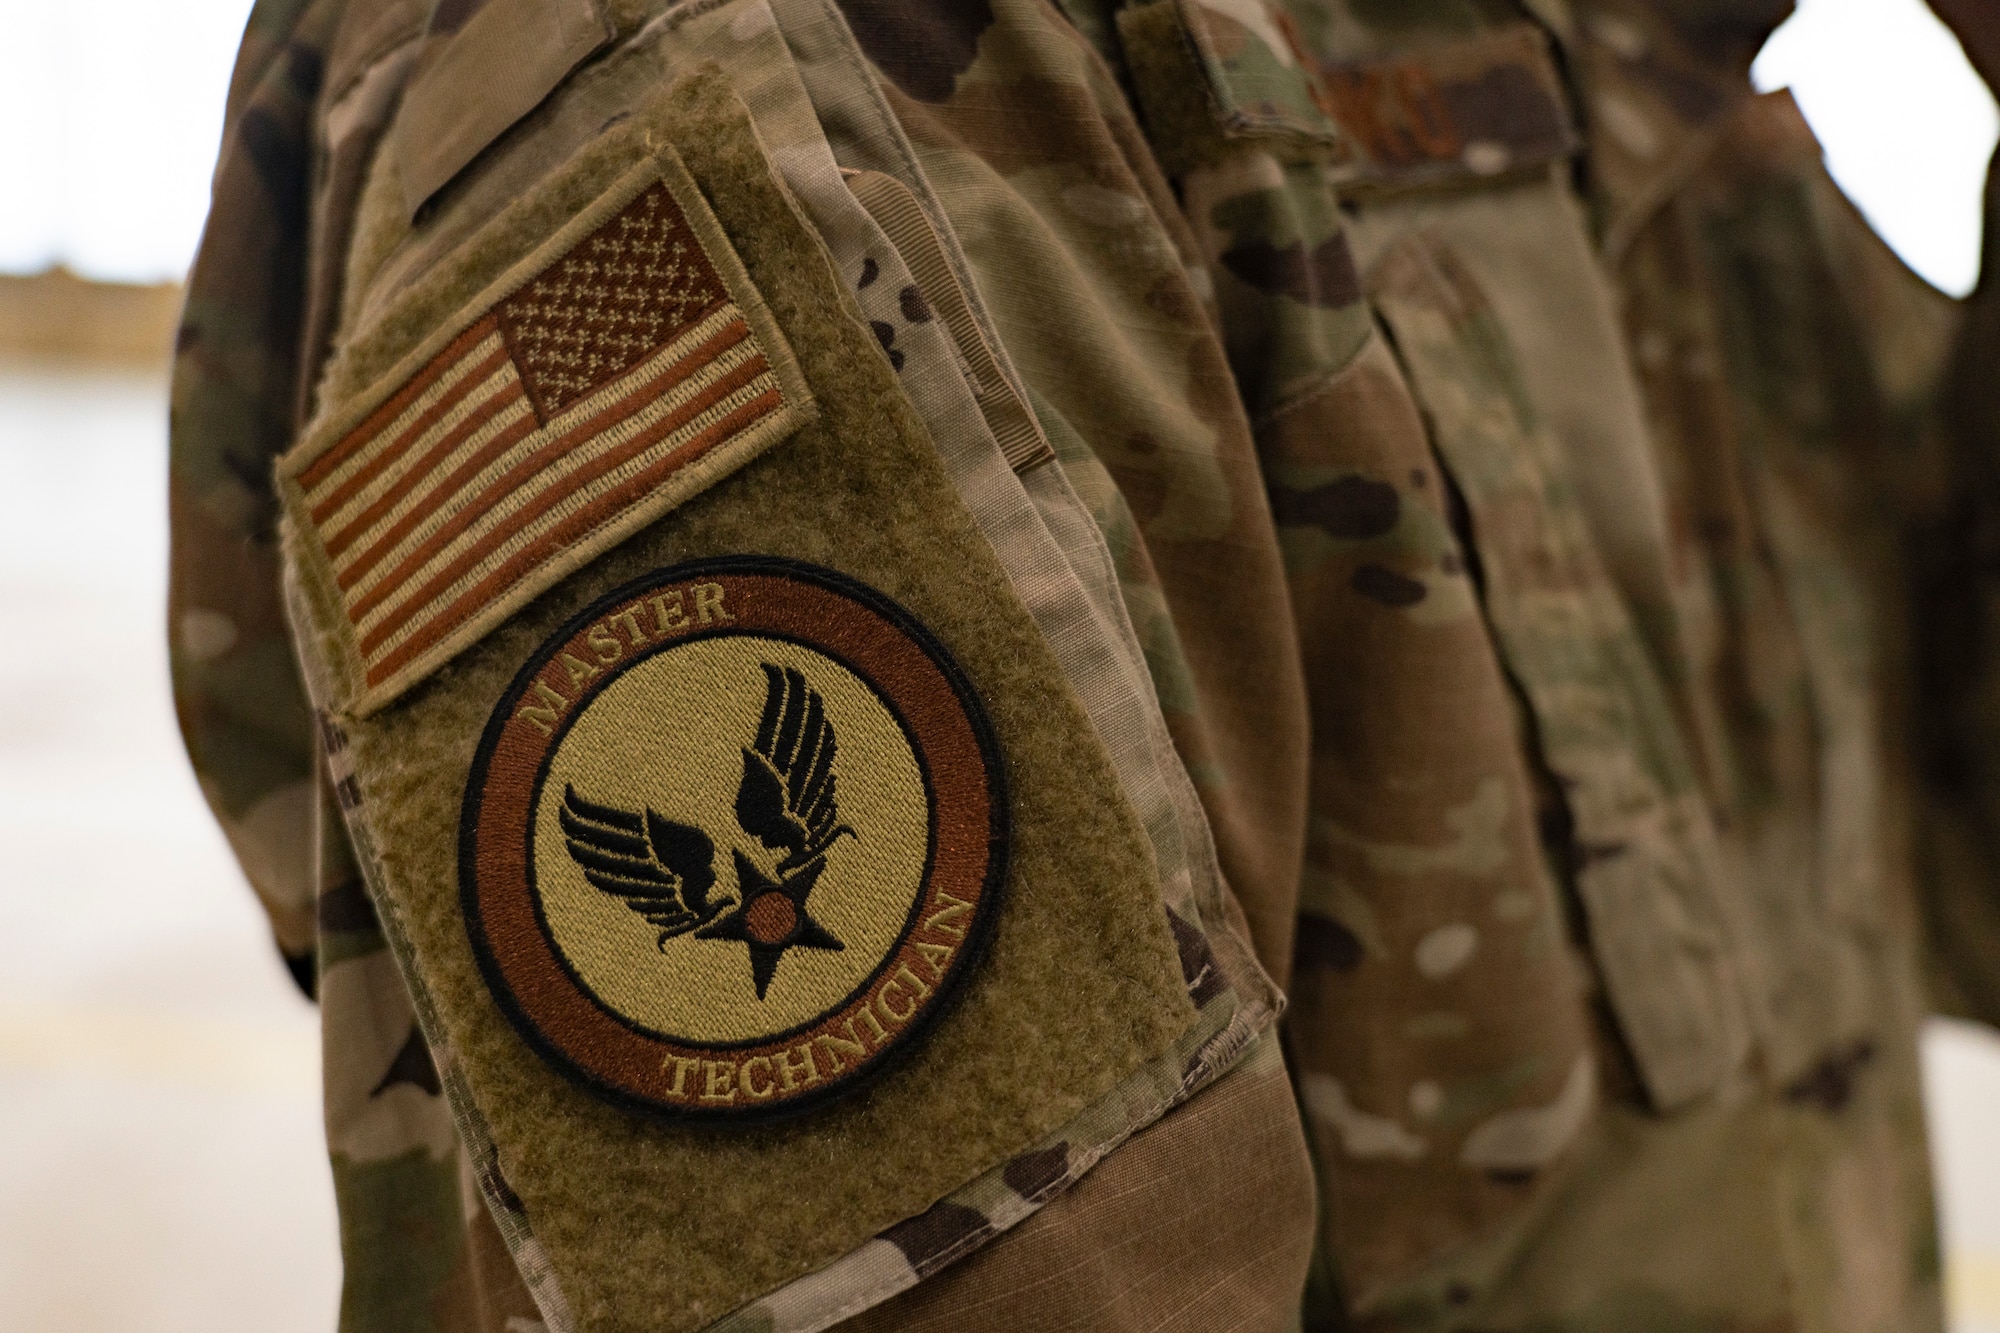 A photo of the master technician patch.